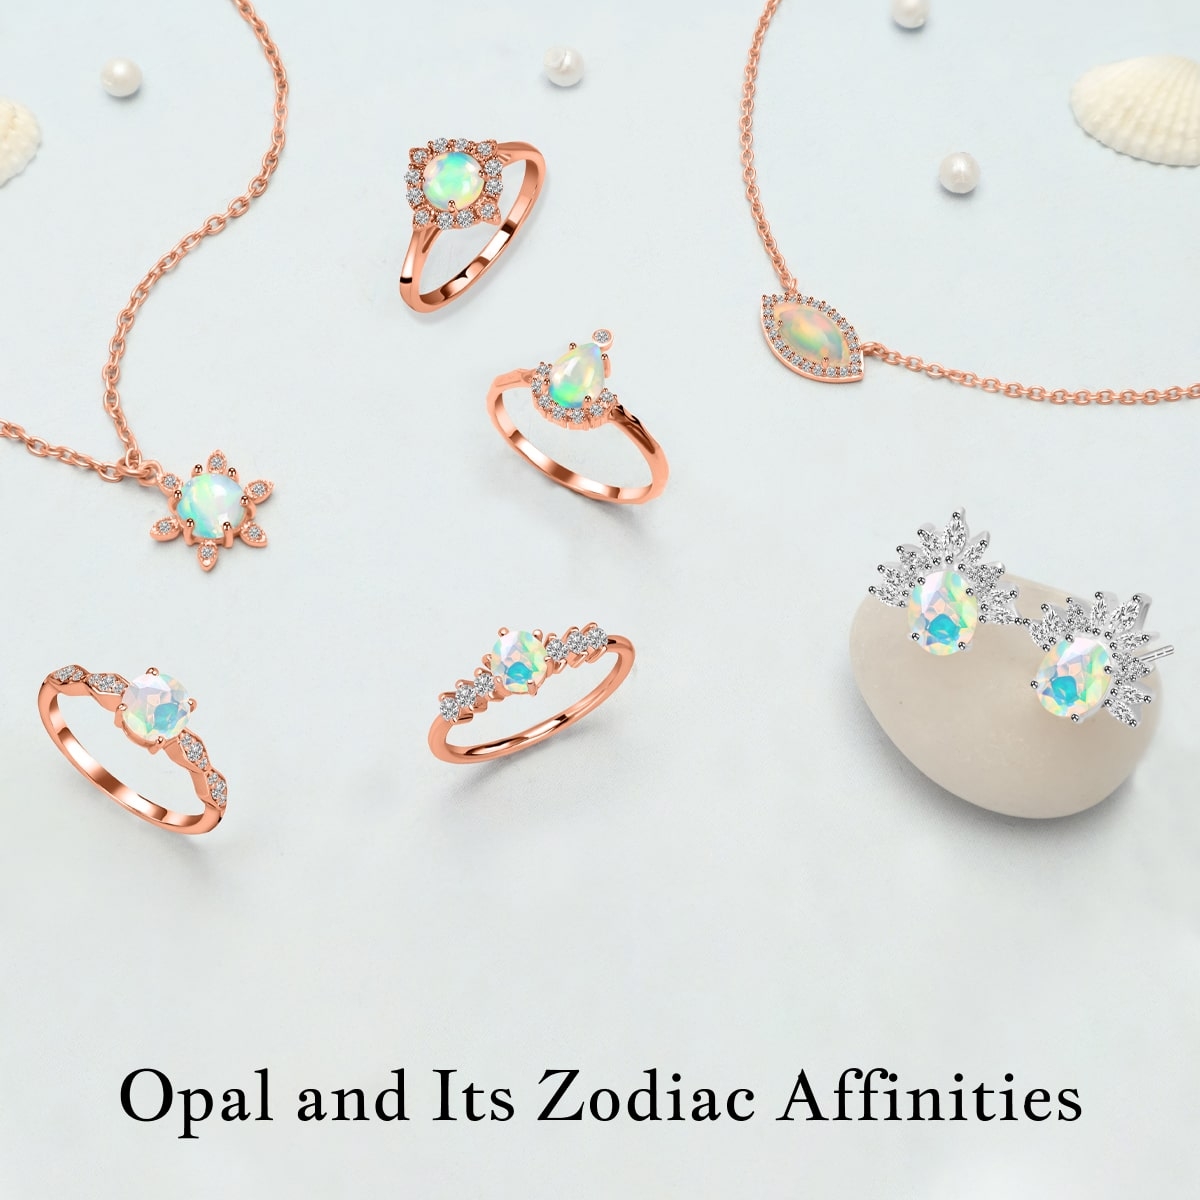 Zodiac sign associated with opal